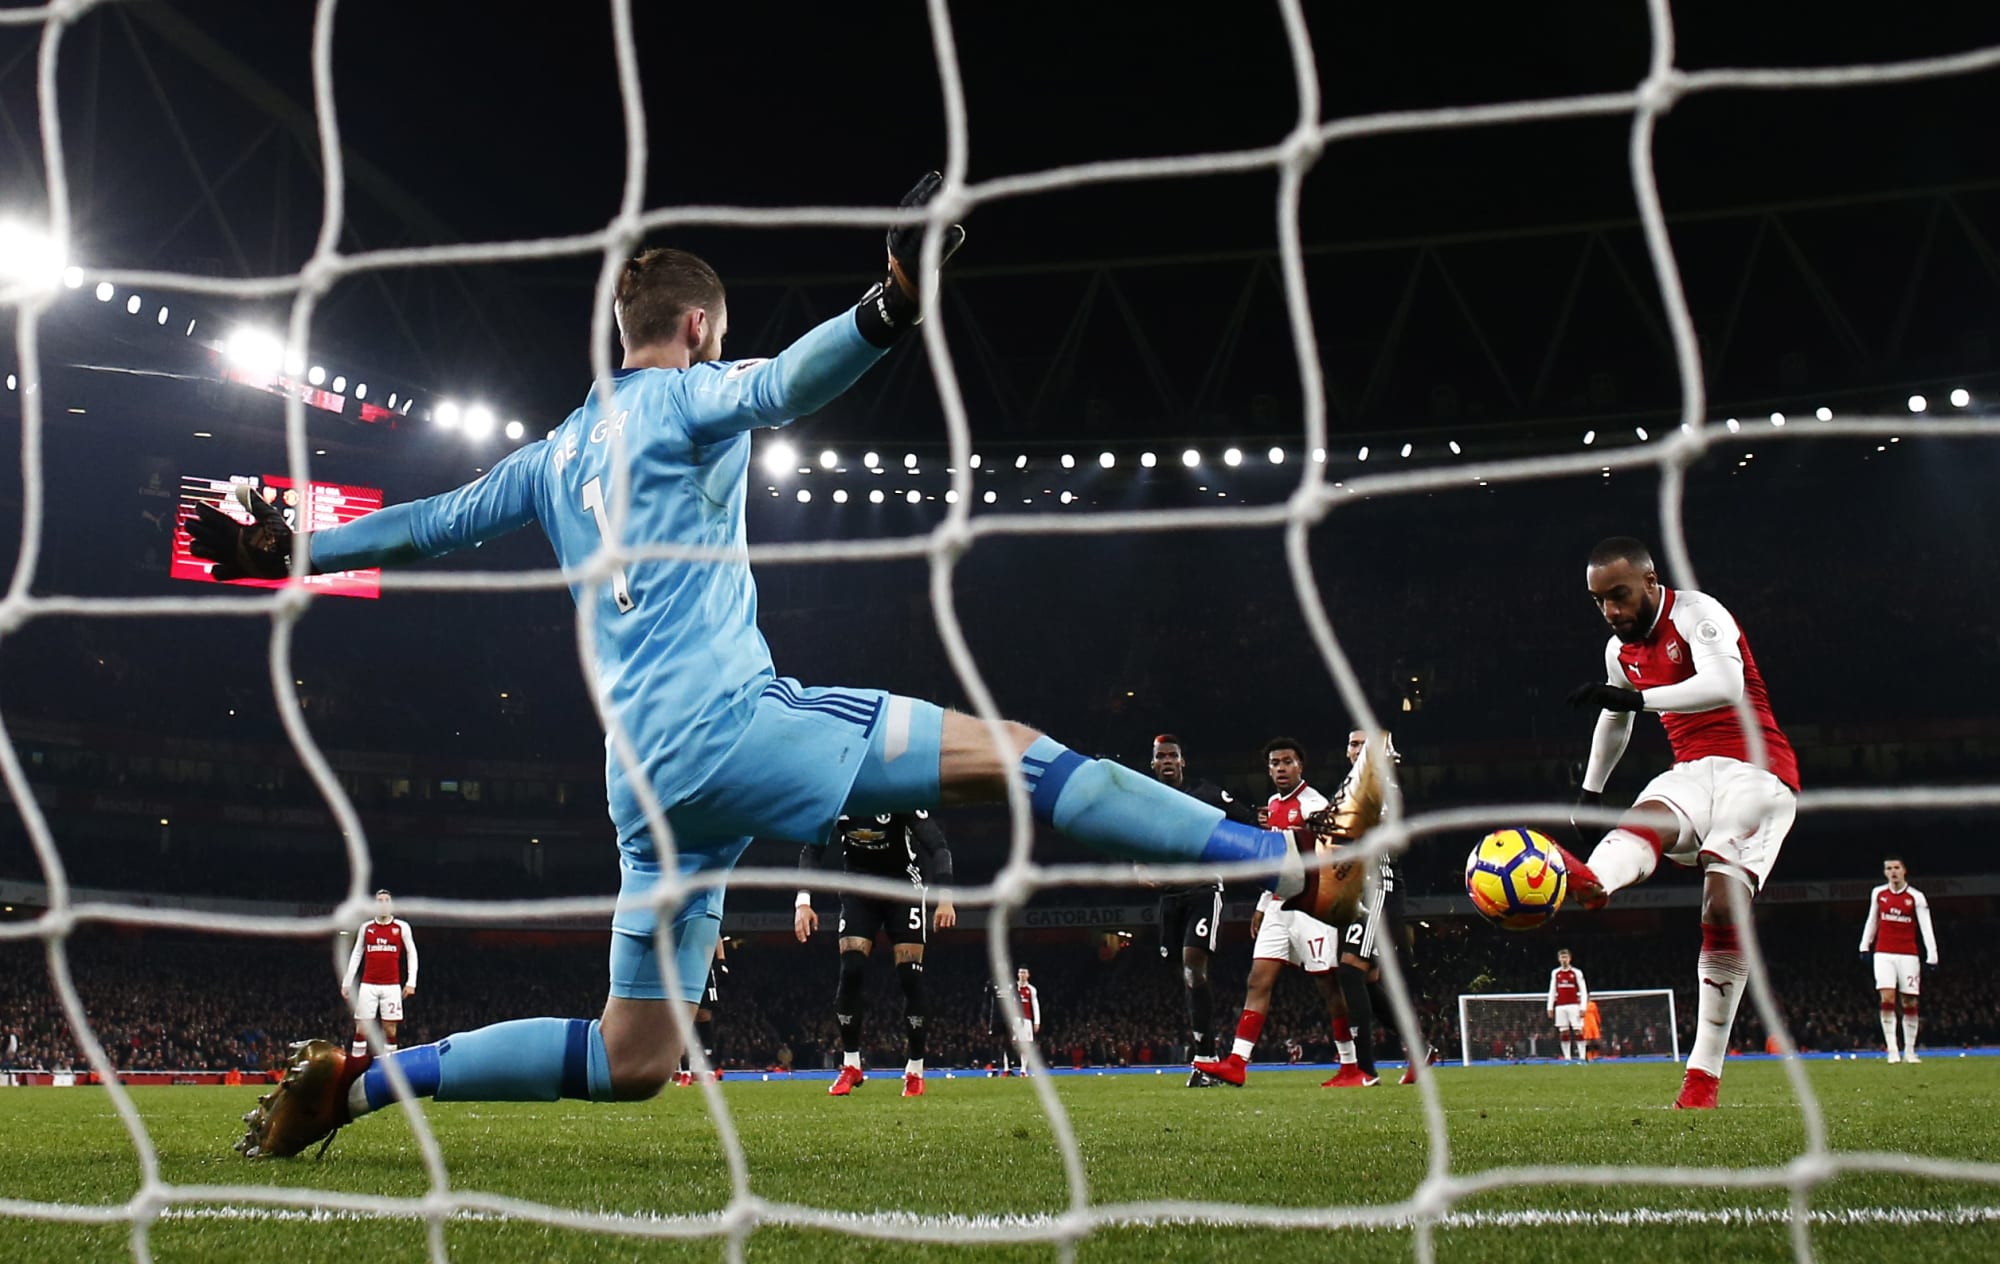 Arsenal Vs Manchester United: The remarkable stats